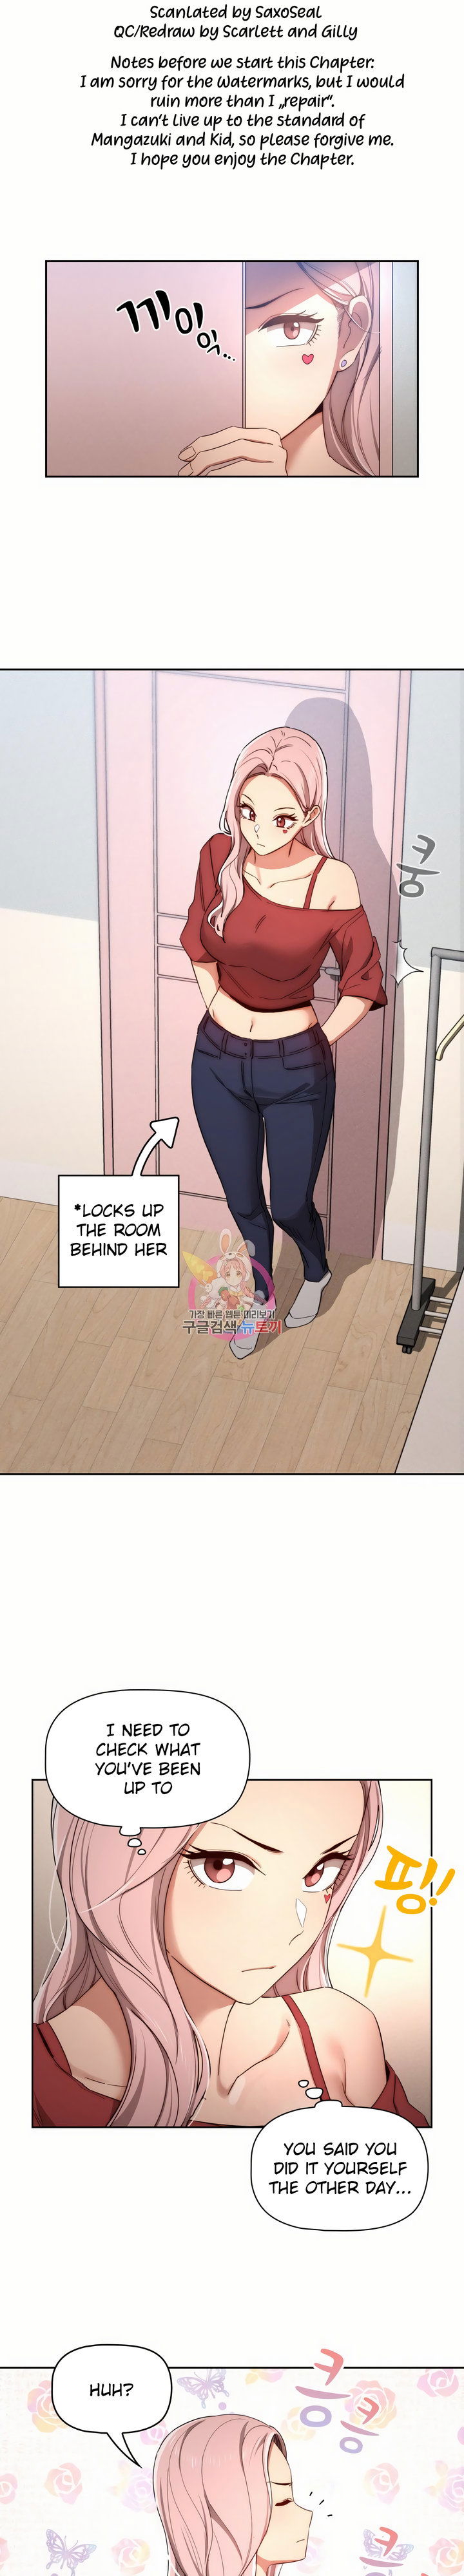 private-tutoring-in-these-trying-times-chap-33-0